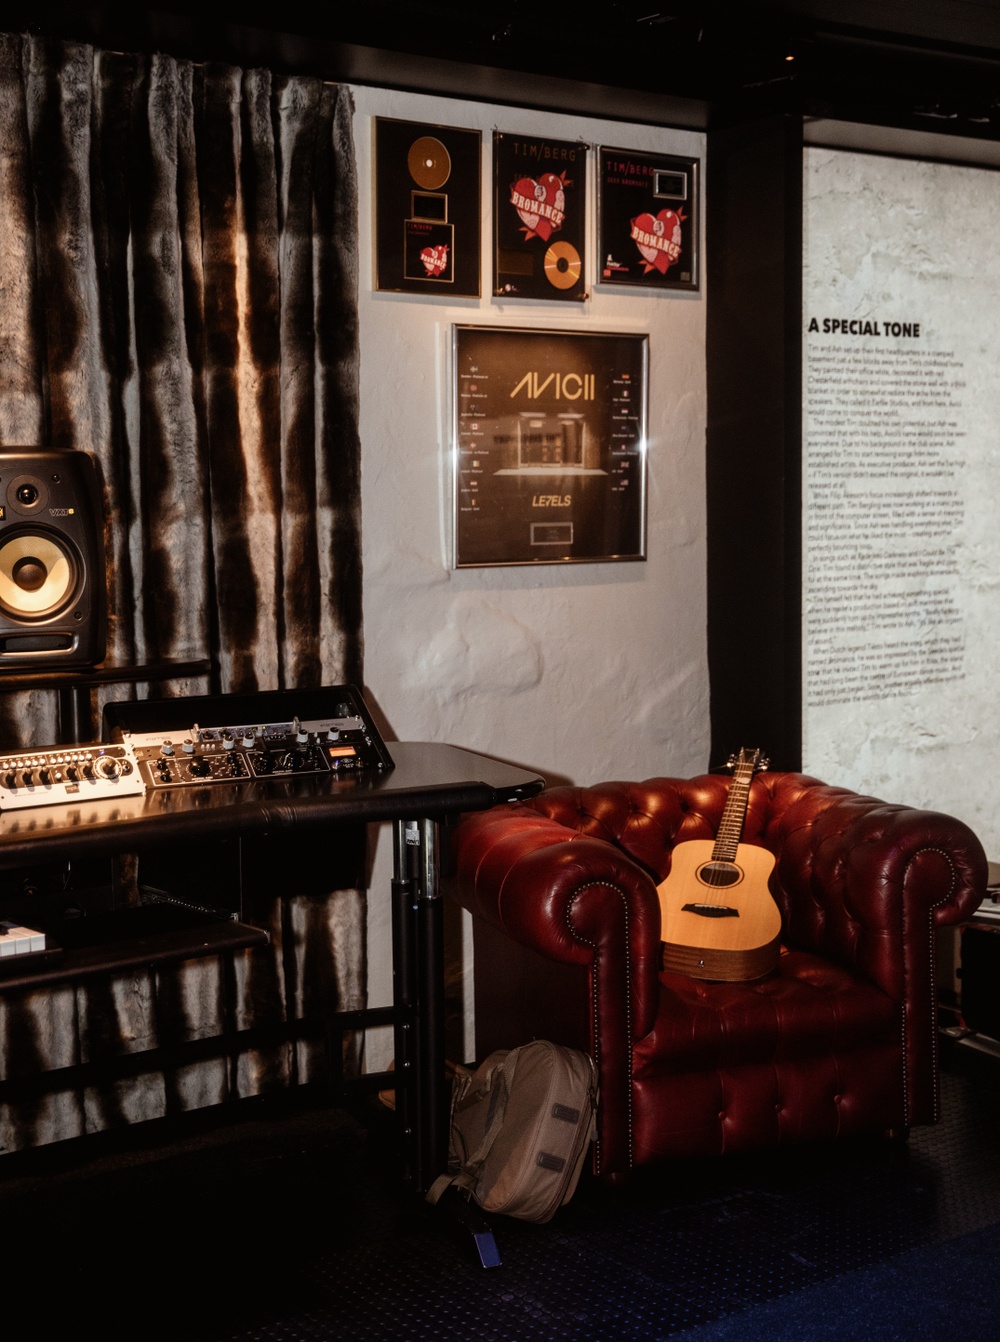 Avicii's first "real" studio located in an Östermalm basement at Avicii Experience. Photo cred: Johanna Pettersson